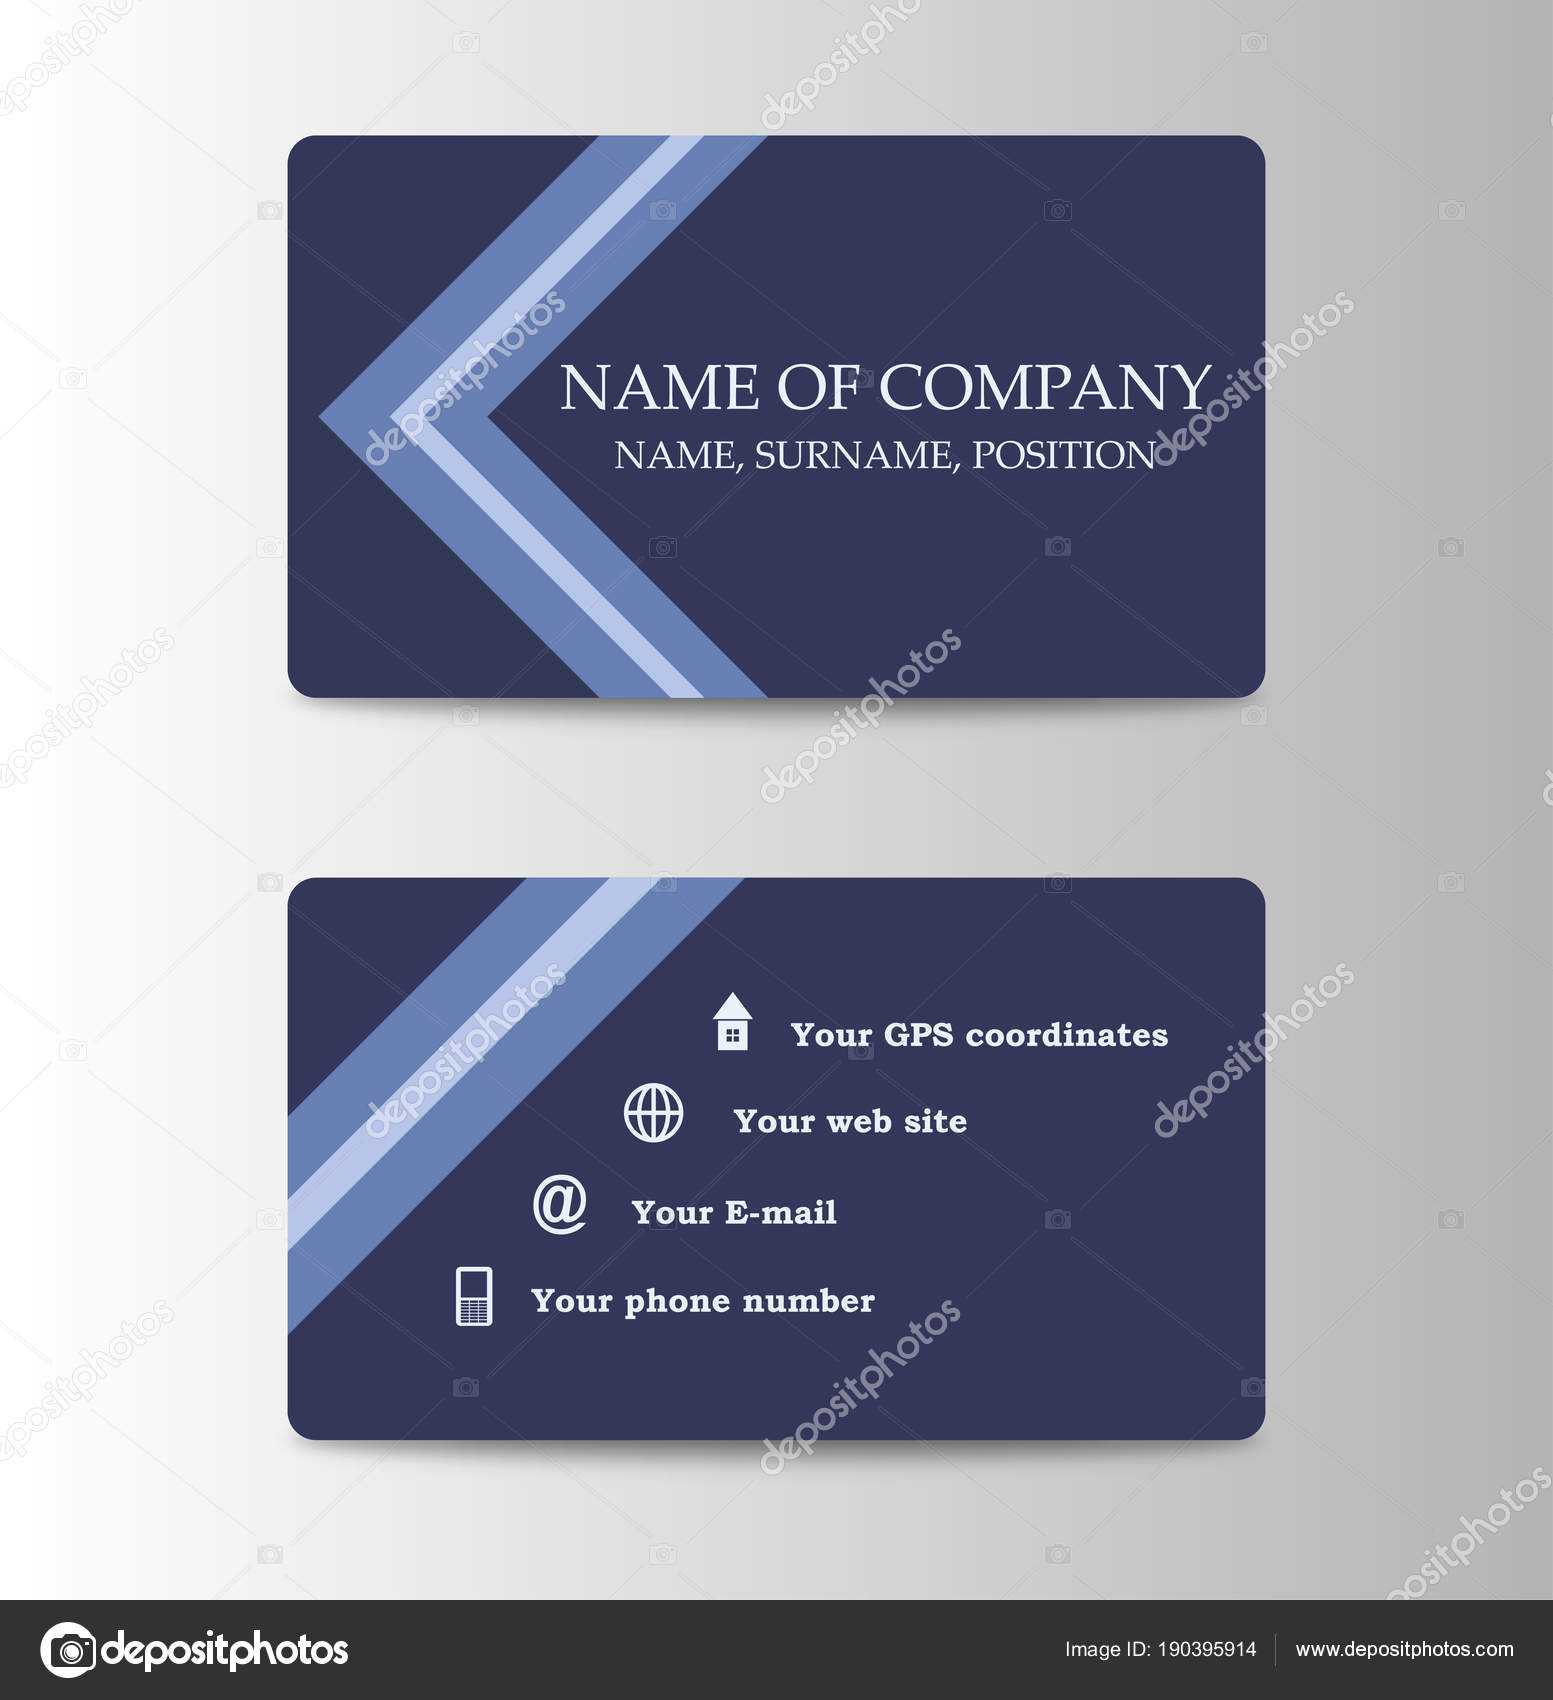 Corporate Id Card Design Template. Personal Id Card For Pertaining To Personal Identification Card Template